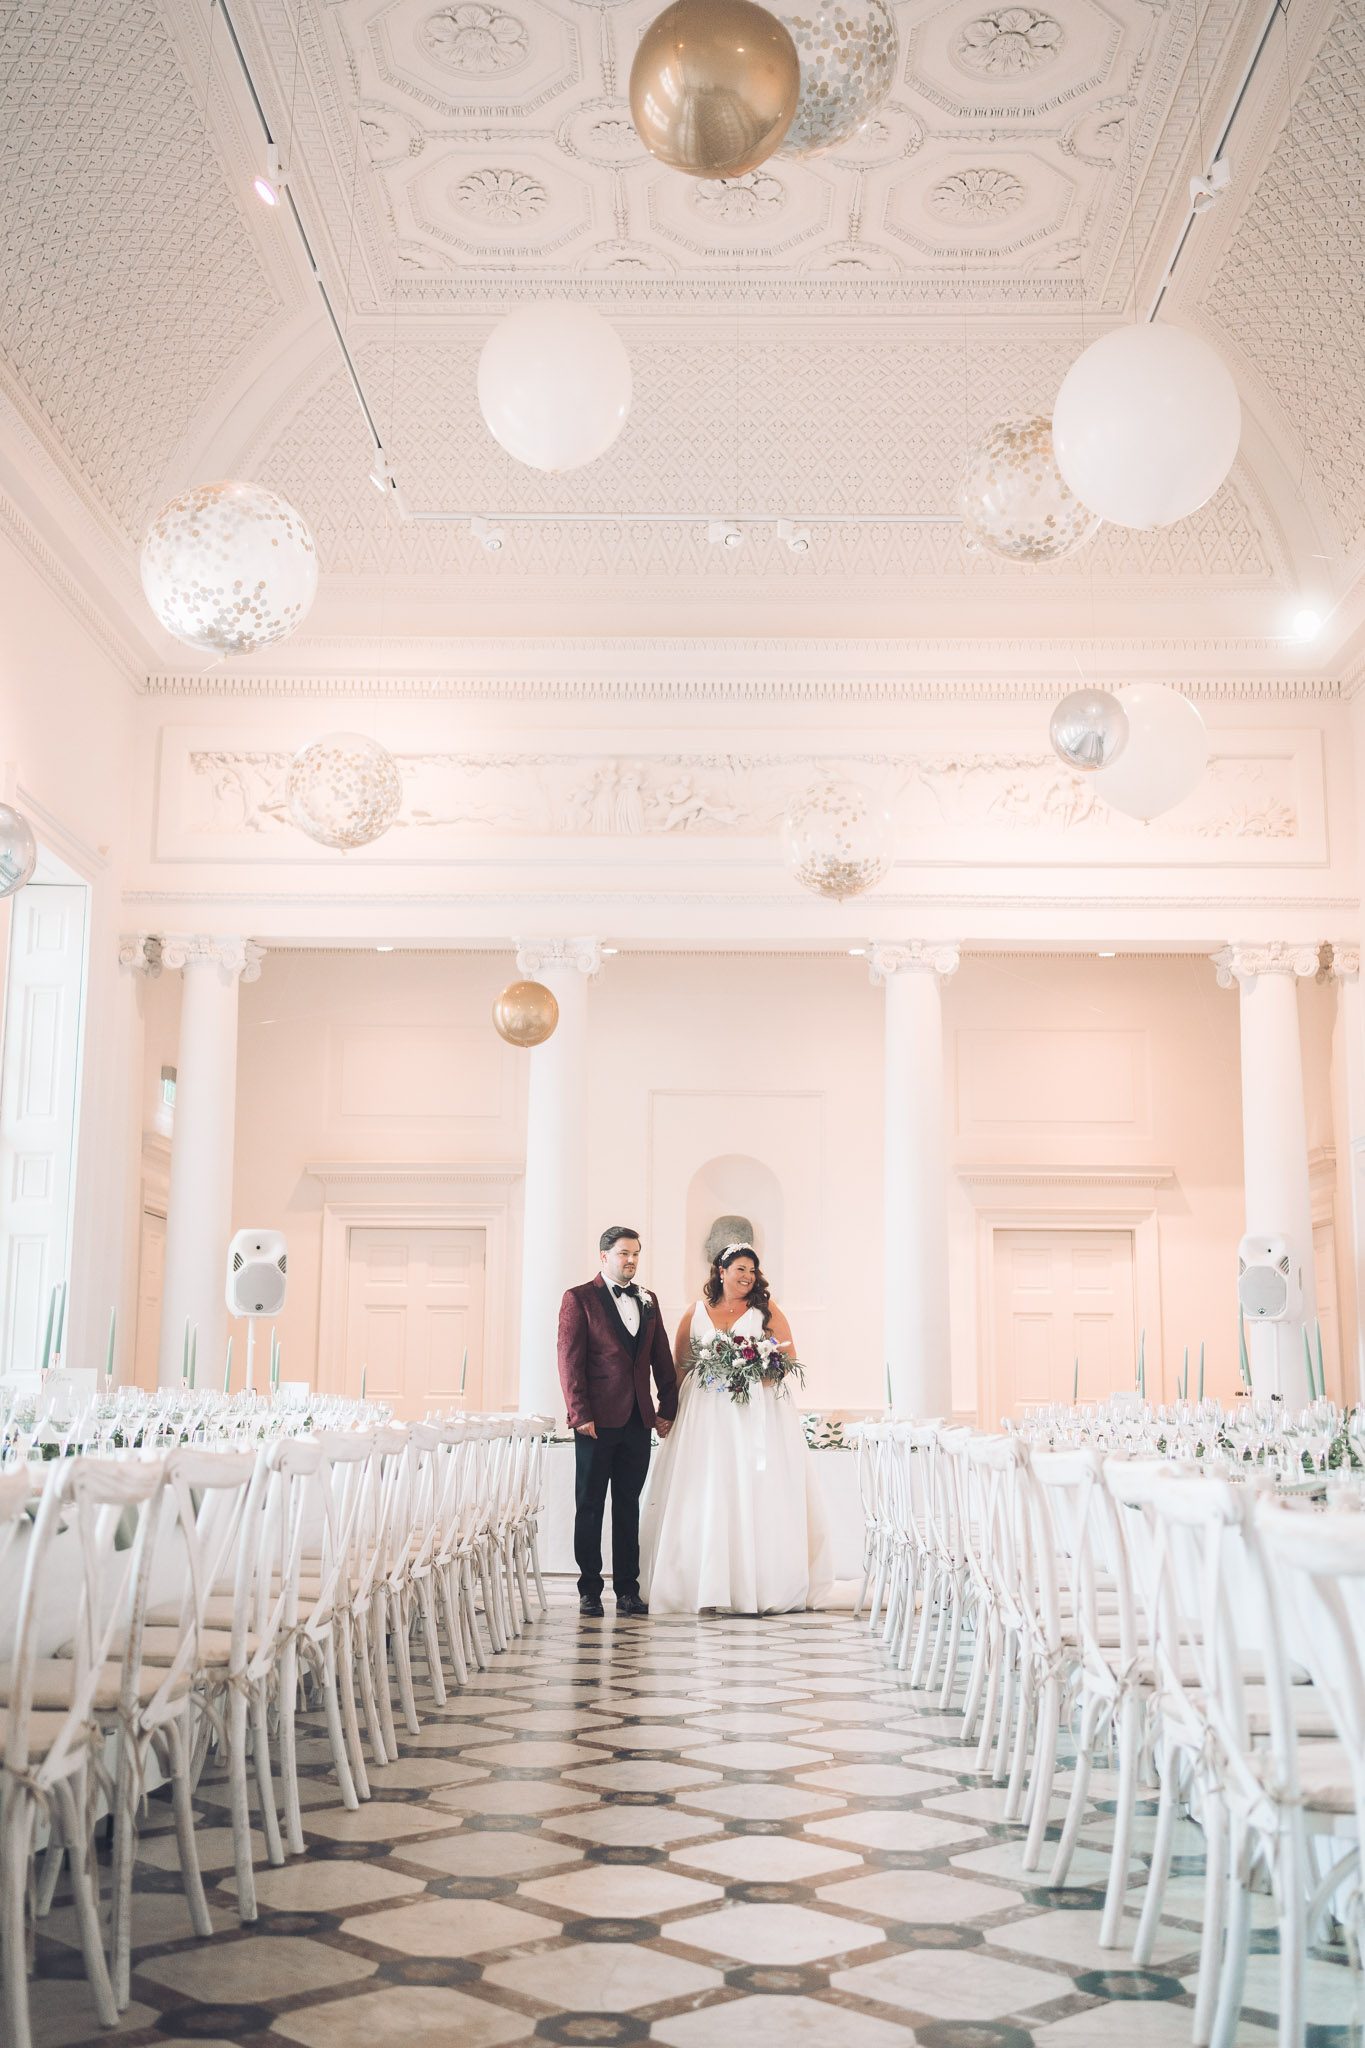 A bride and groom in white and burgundy stand in a grand white hall filled with large white and gold balloons, tables and chairs, and flowers.